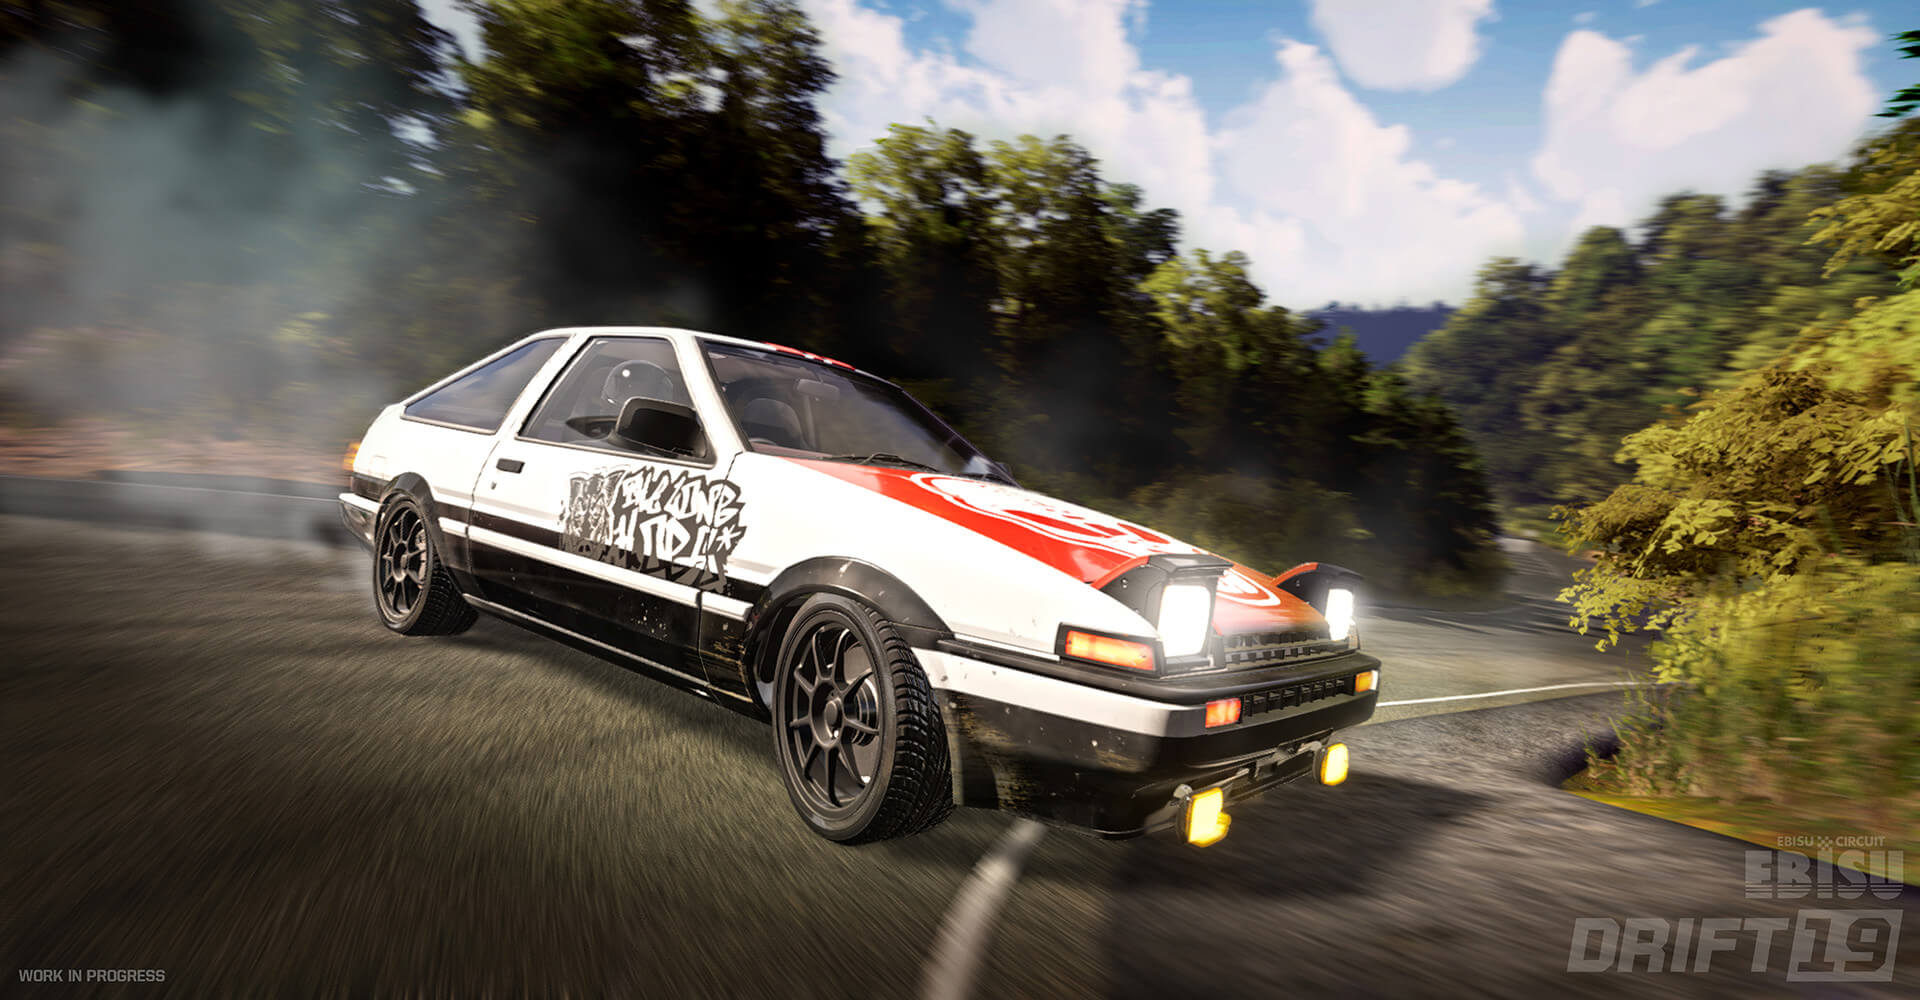 Drift 19 is the first and only serious drifting simulator coming